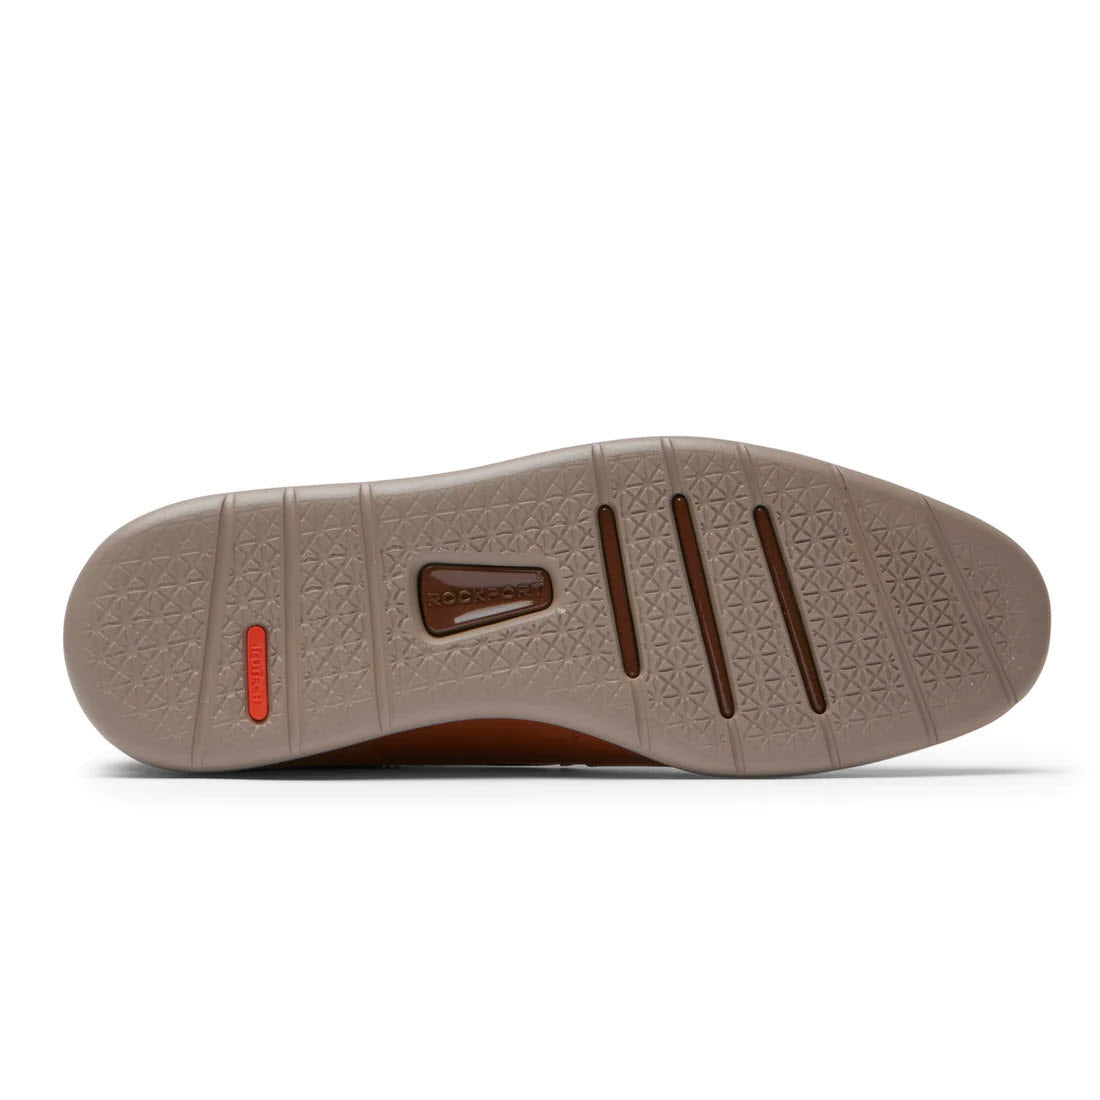 Bottom view of a Rockport shoe showing a textured, lightweight outsole with a brown color tone and a red accent on a rectangular inset.